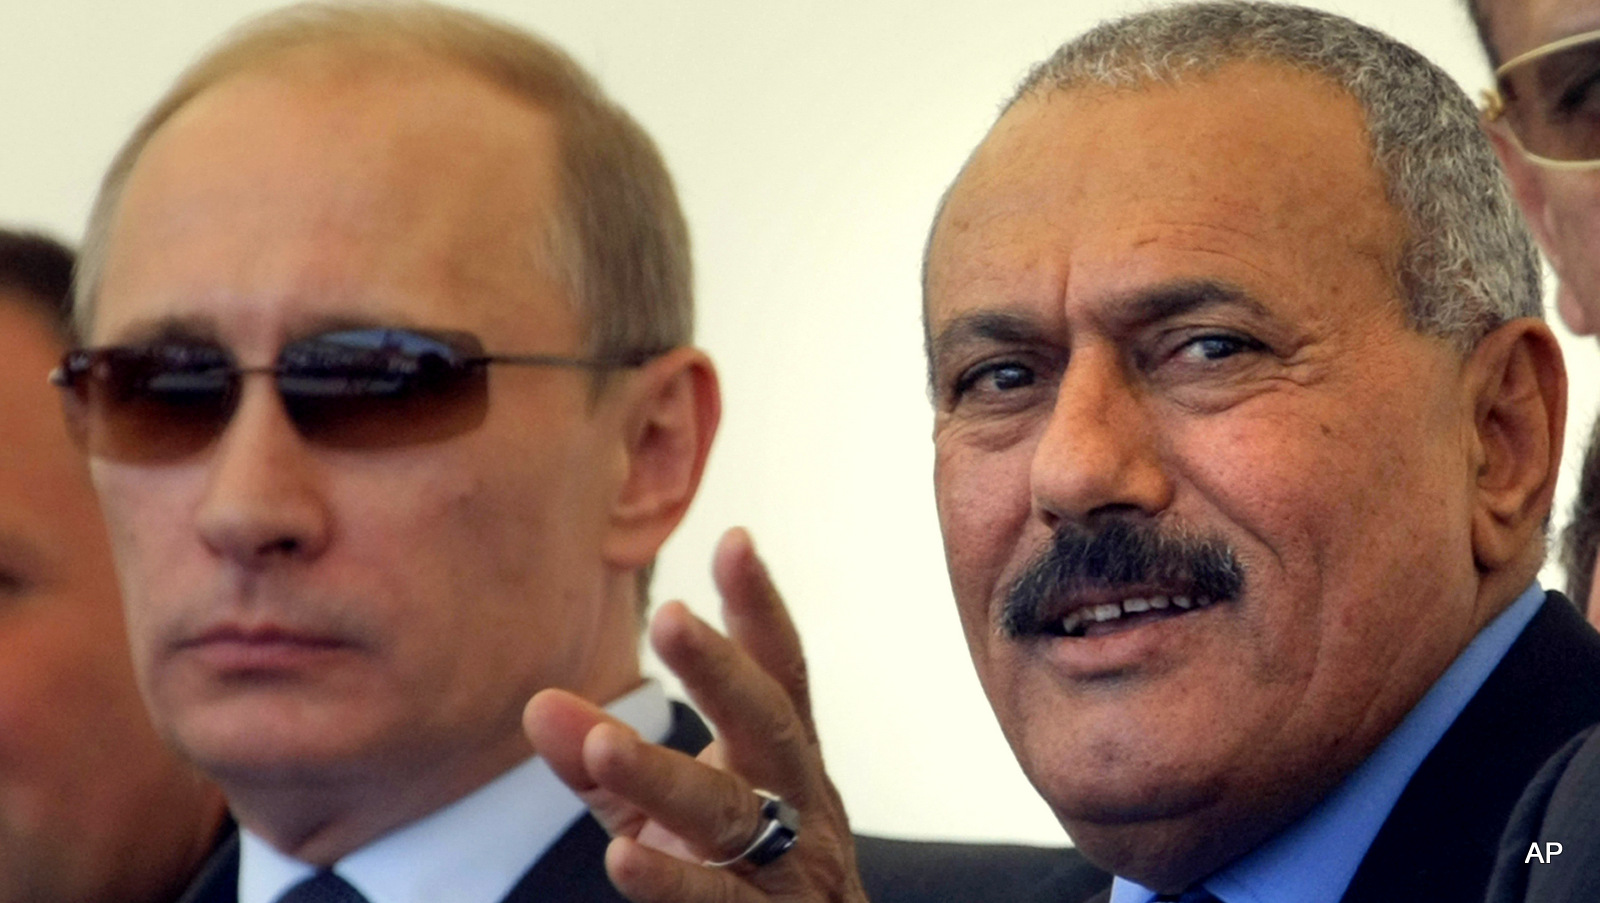 Russian Prime Minister Vladimir Putin, left, and Yemen's President Ali Abdullah Saleh watch a military show as they attend the international forum "Technologies in machine building 2010" in Zhukovsky outside Moscow, Wednesday, June 30, 2010.